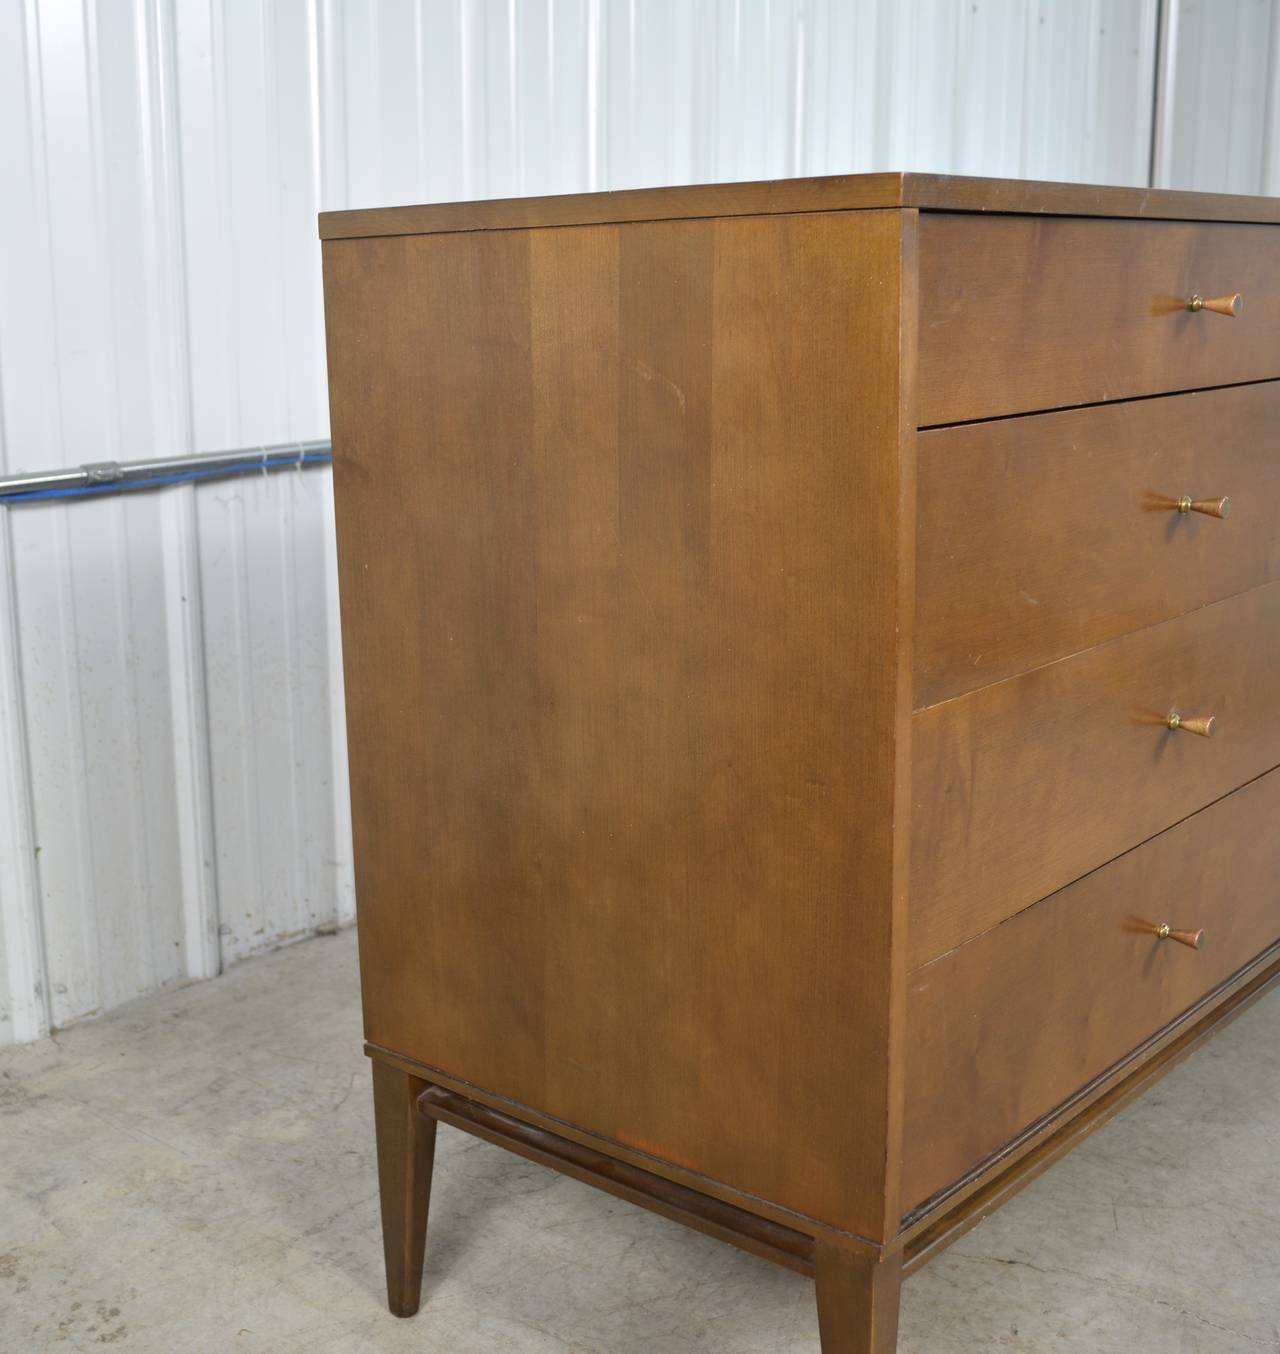 An eight-drawer dresser by Paul McCobb for the Planner Group by Winchendon. Brass hardware.